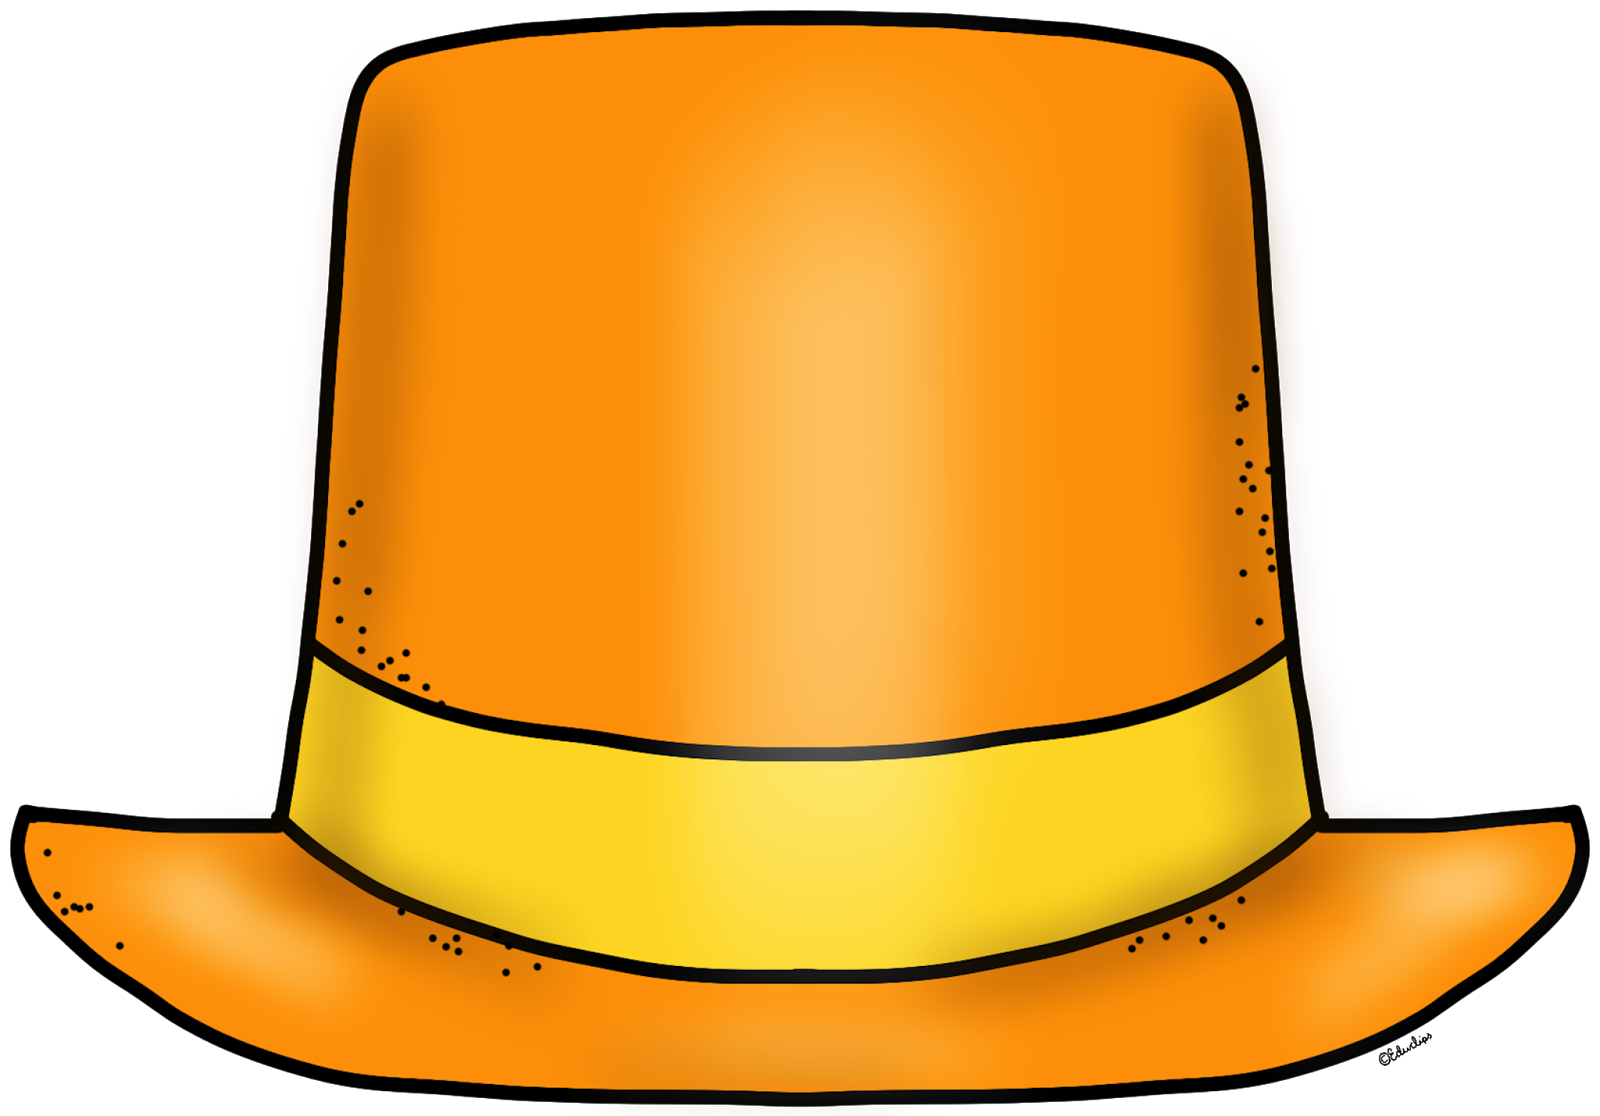 Free Stylish Man In Top Hat Image Clipart